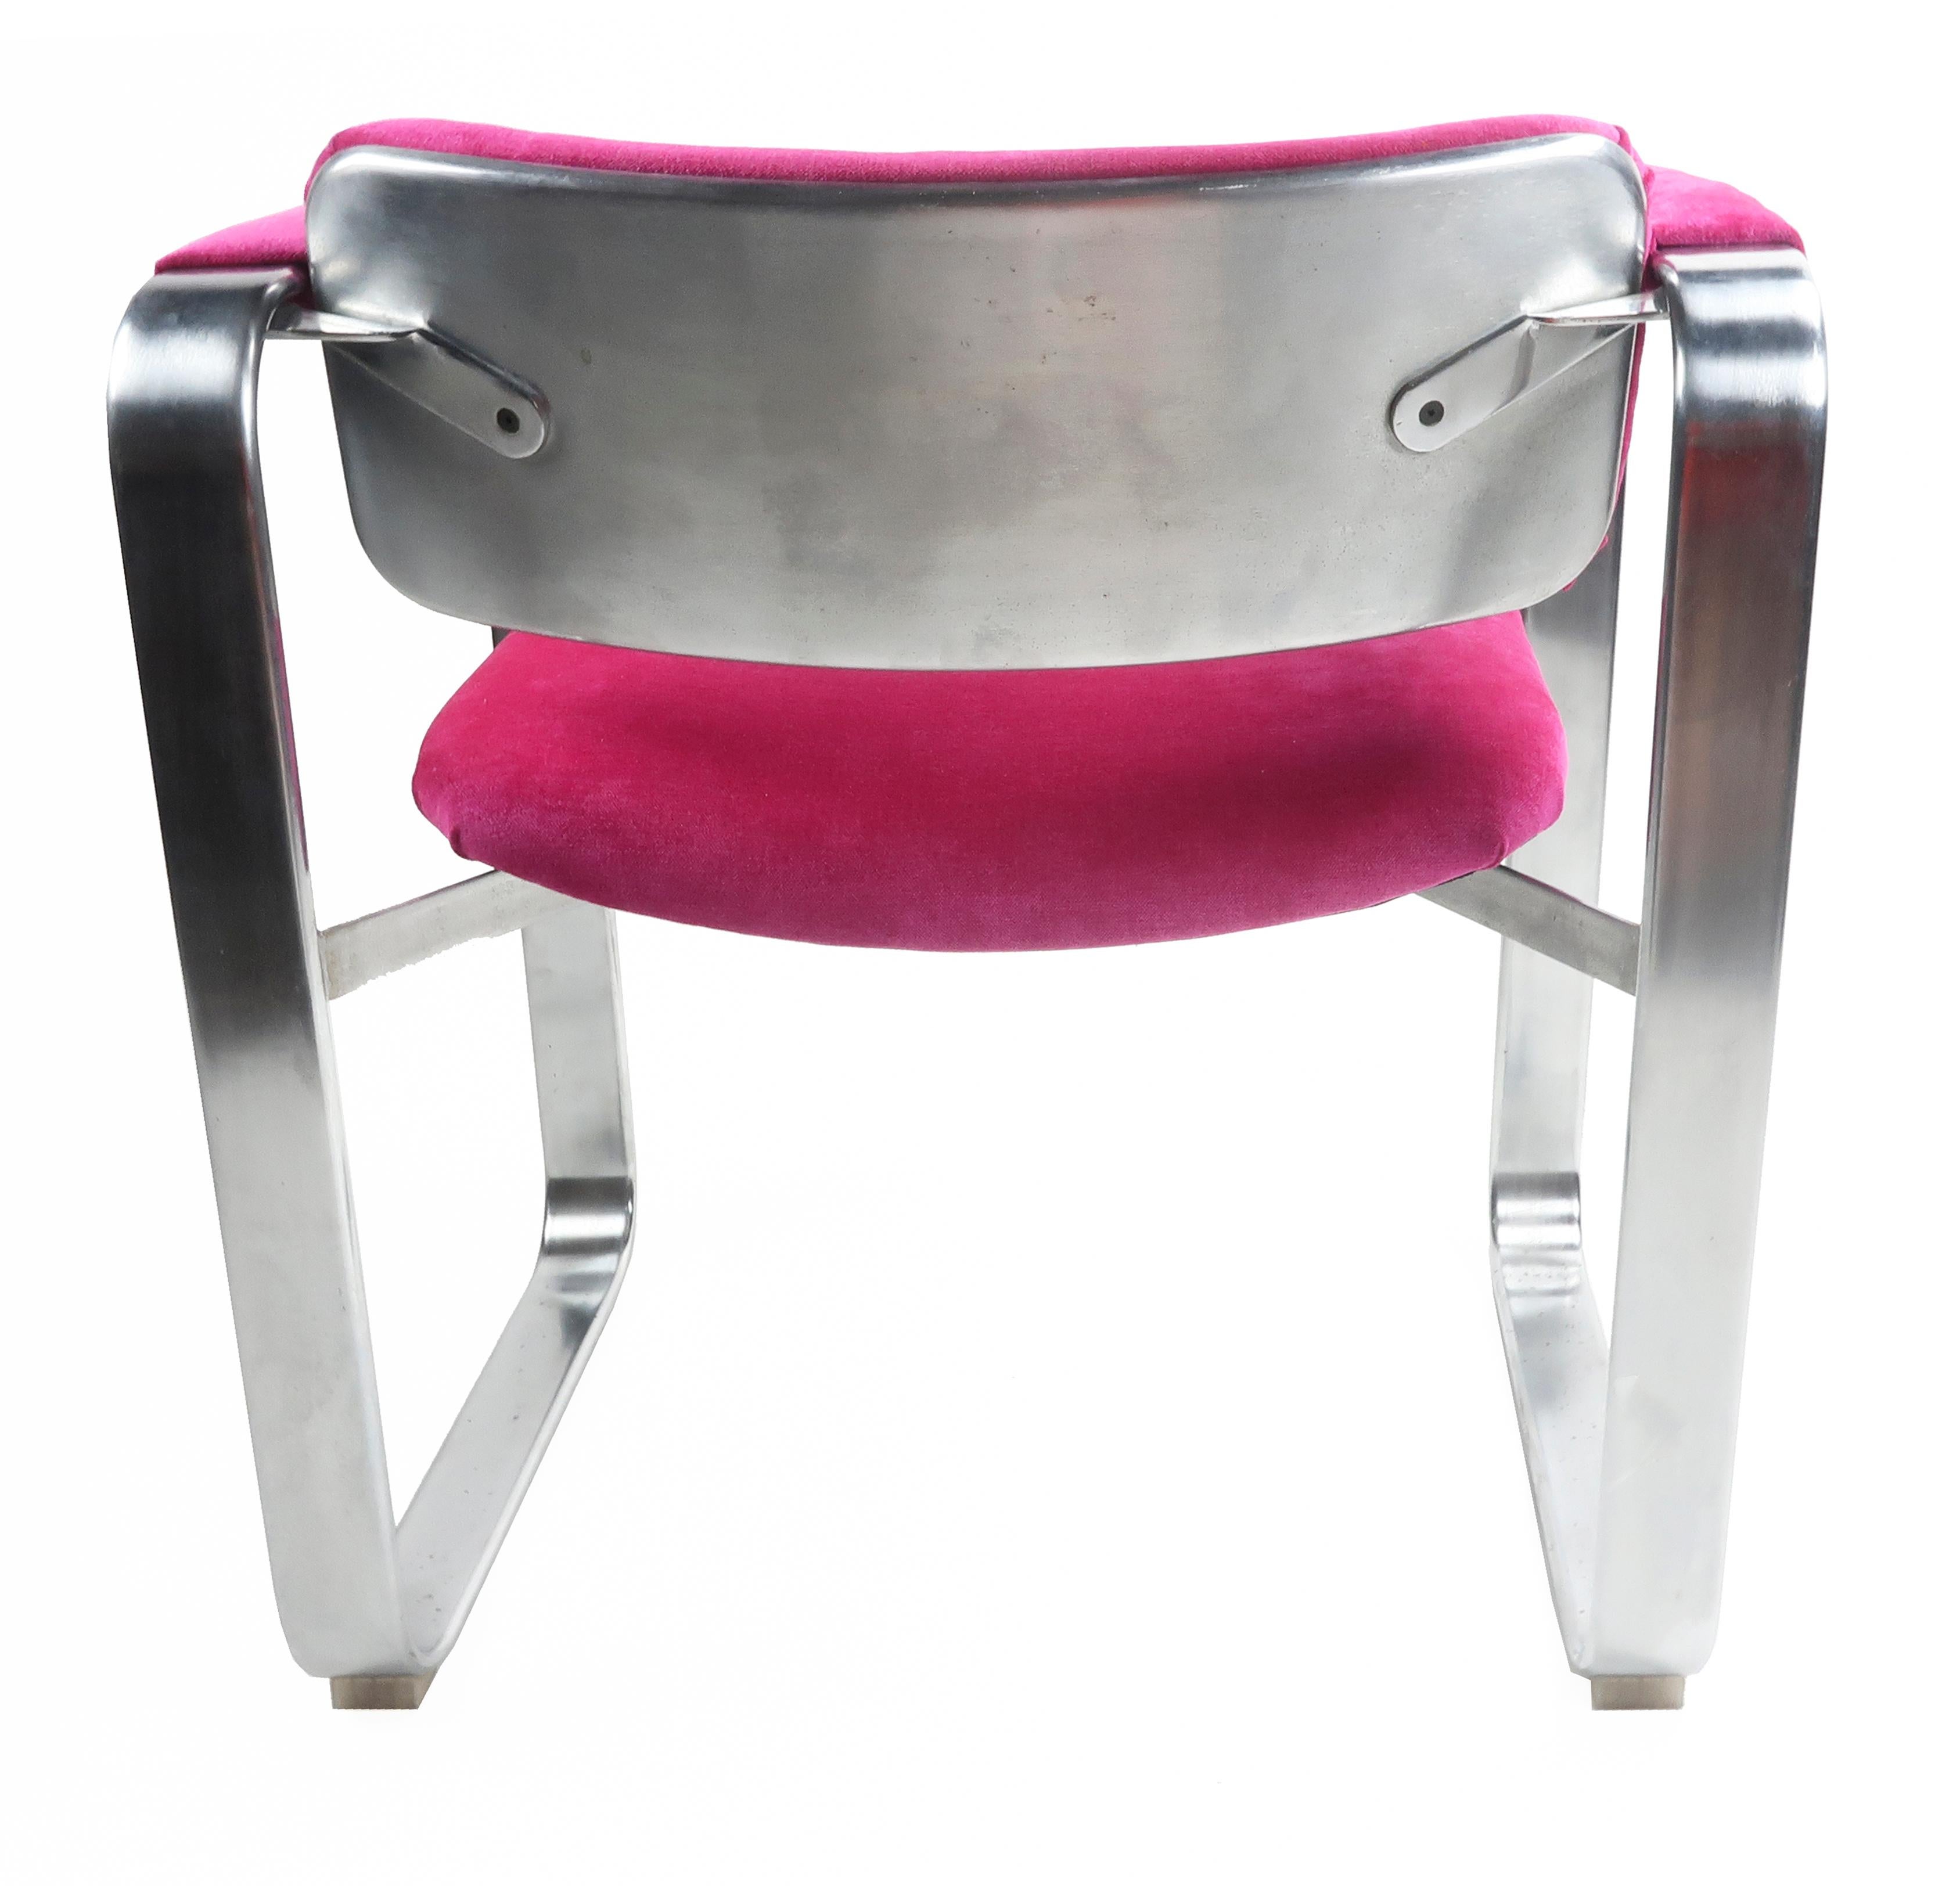 A dazzling Scandinavian Modern executive armchair by famed Finnish designer Eero Aarnio for Mobel Italia (1968). The frame has a satin chrome finish with a stainless back. and new hot pink/fuchsia chenille upholstery on the seat, back and